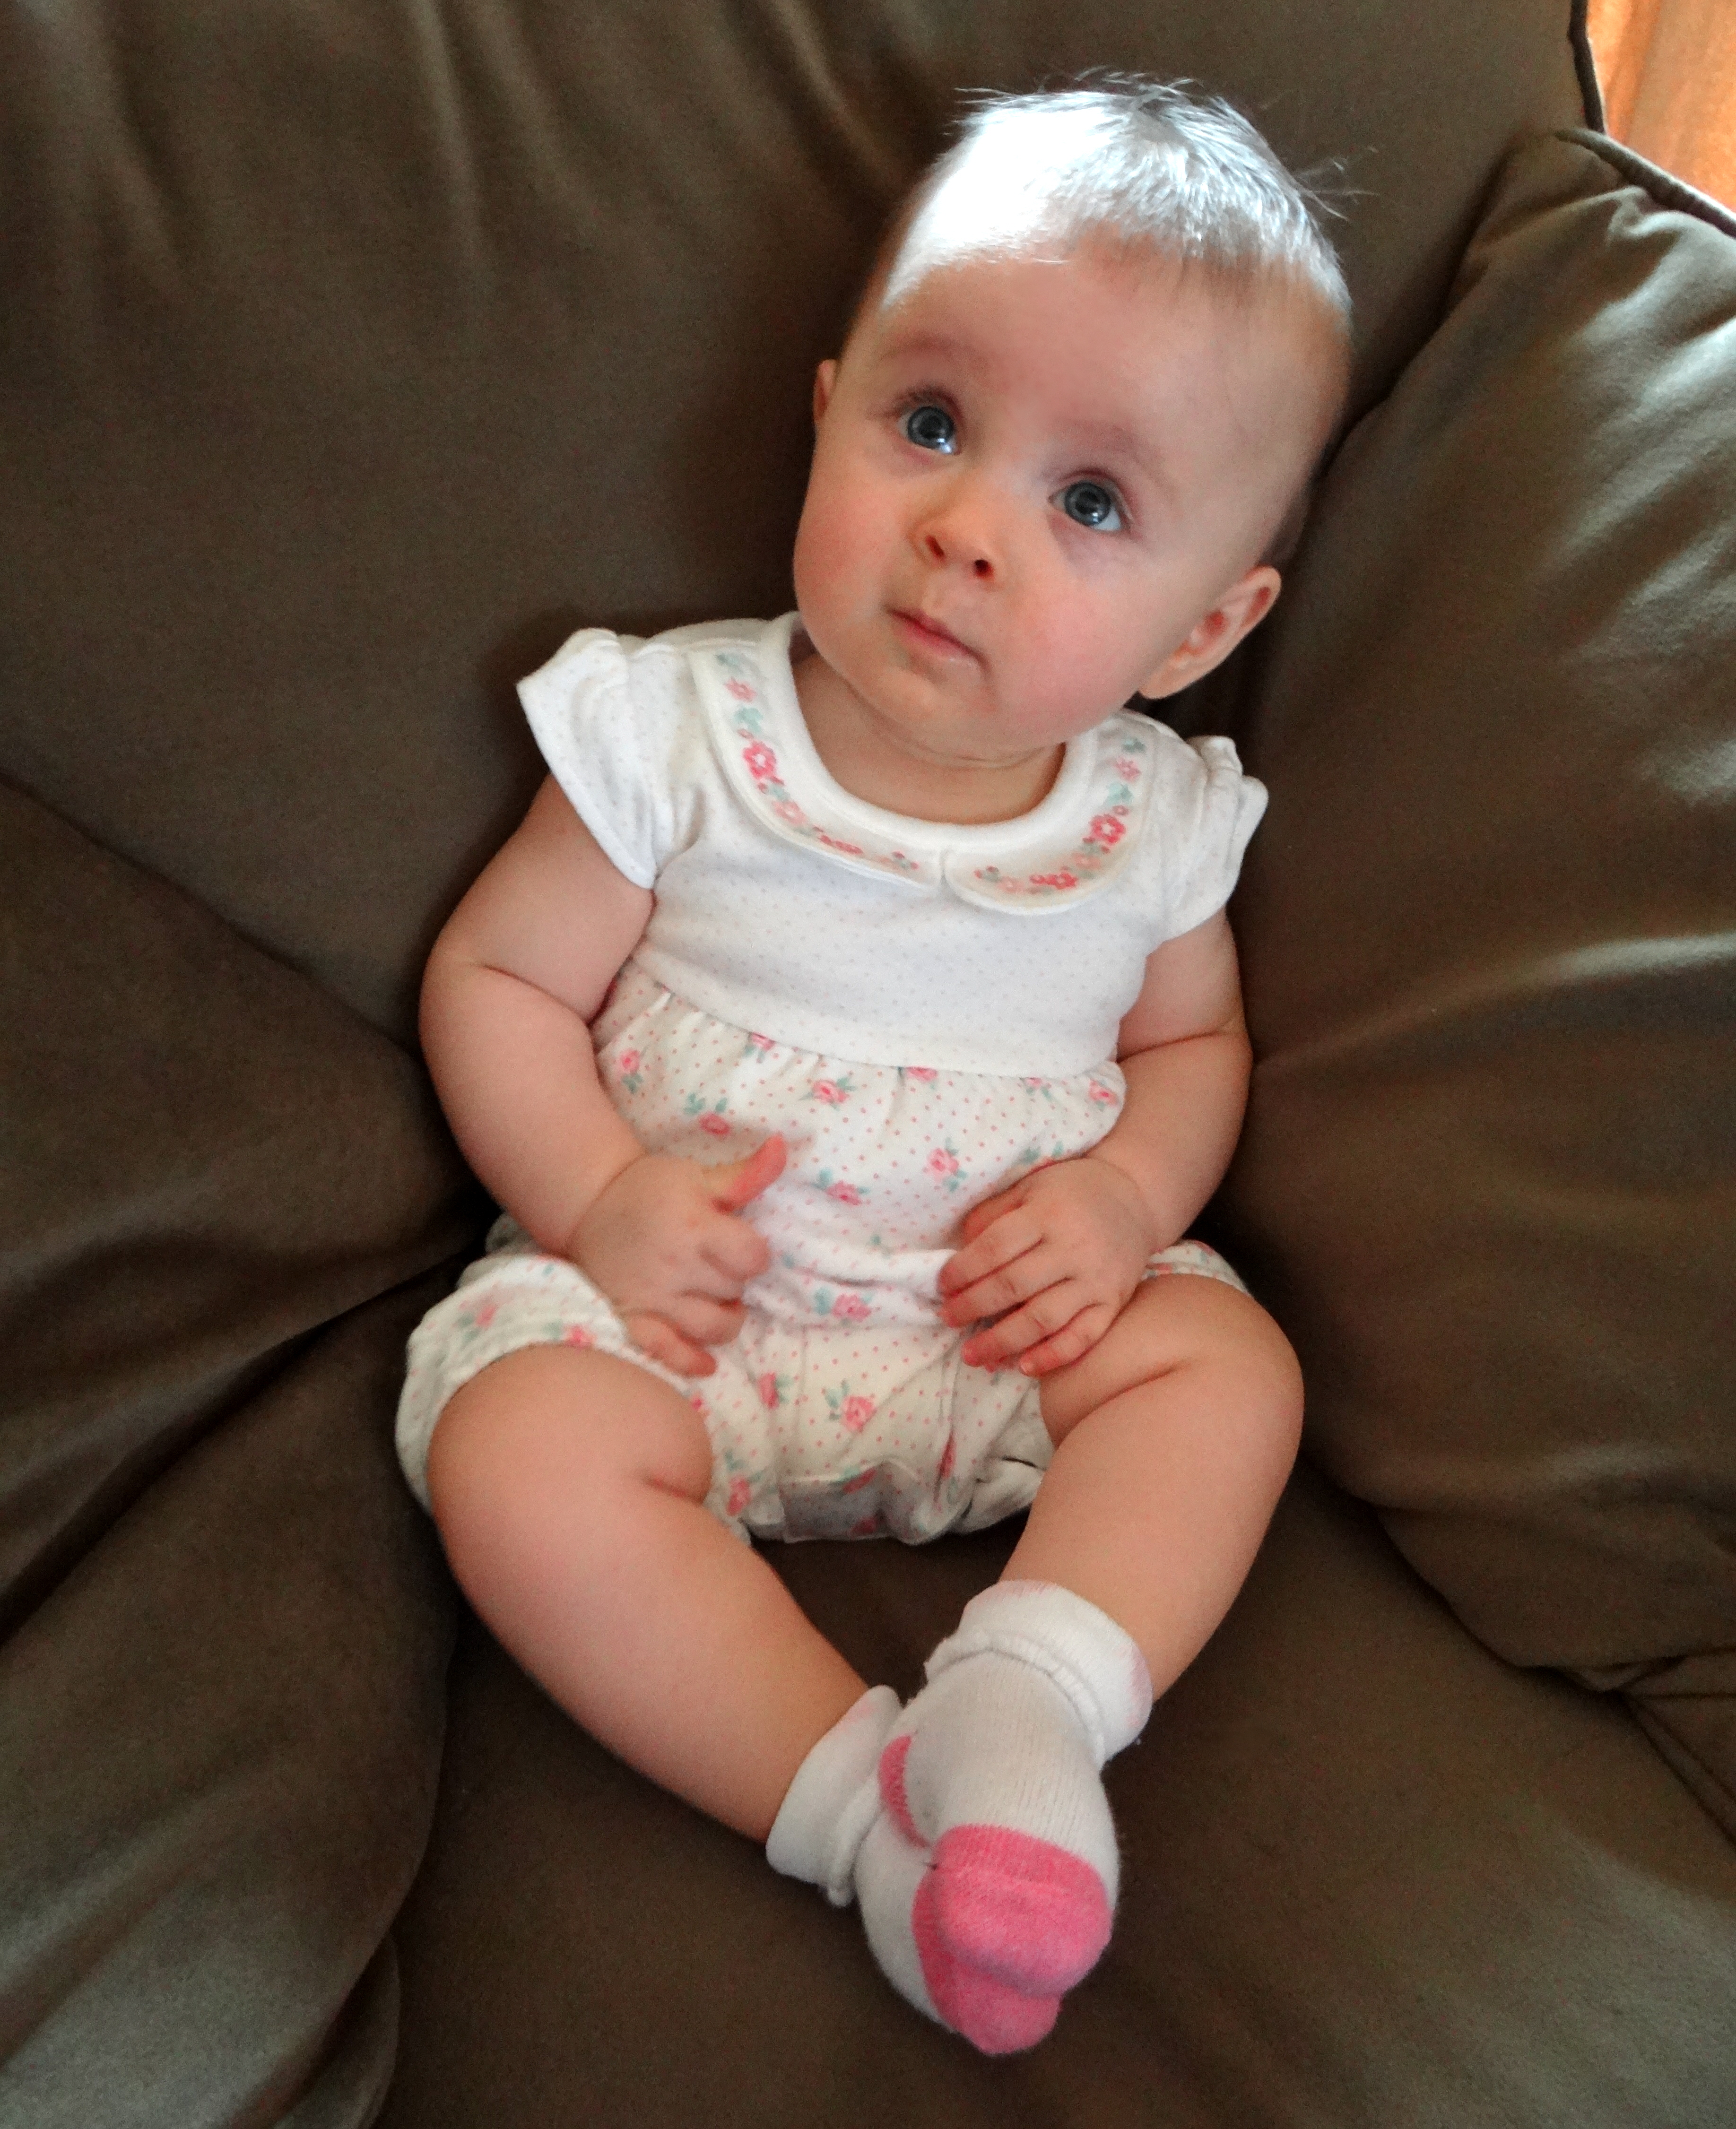 Baby girl sitting on a couch